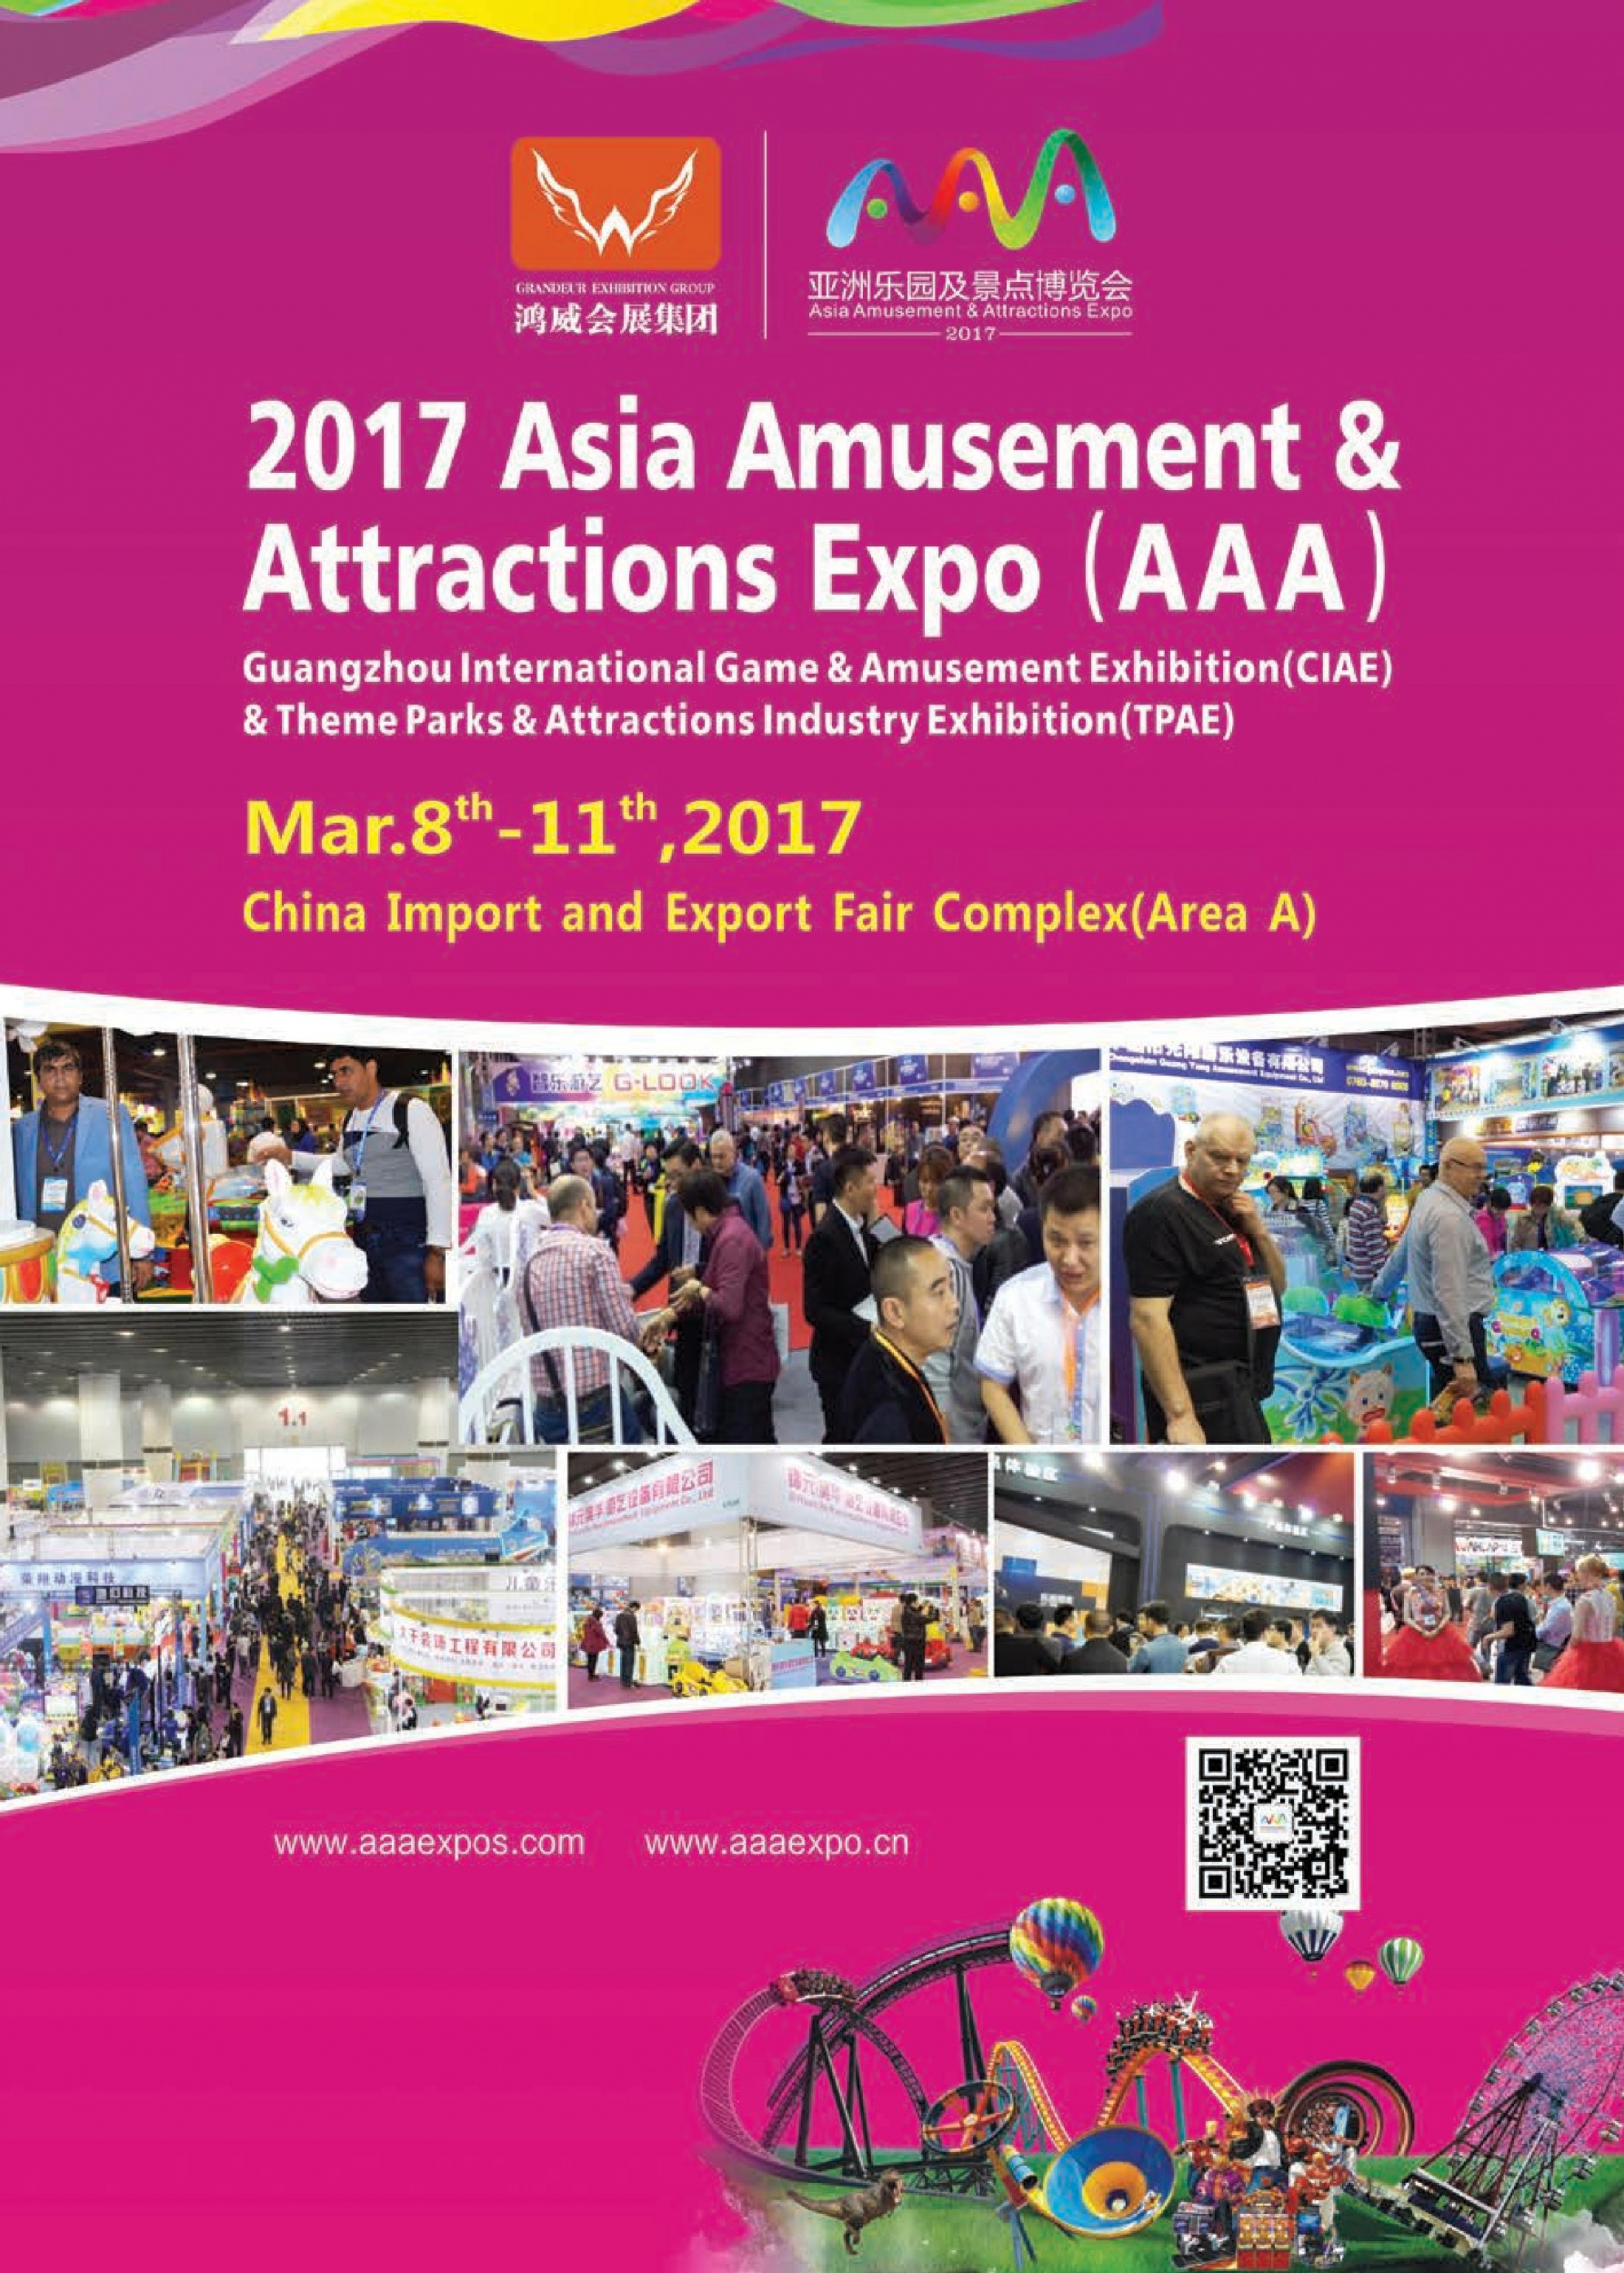 Asia Amusement & Attractions Expo 2017